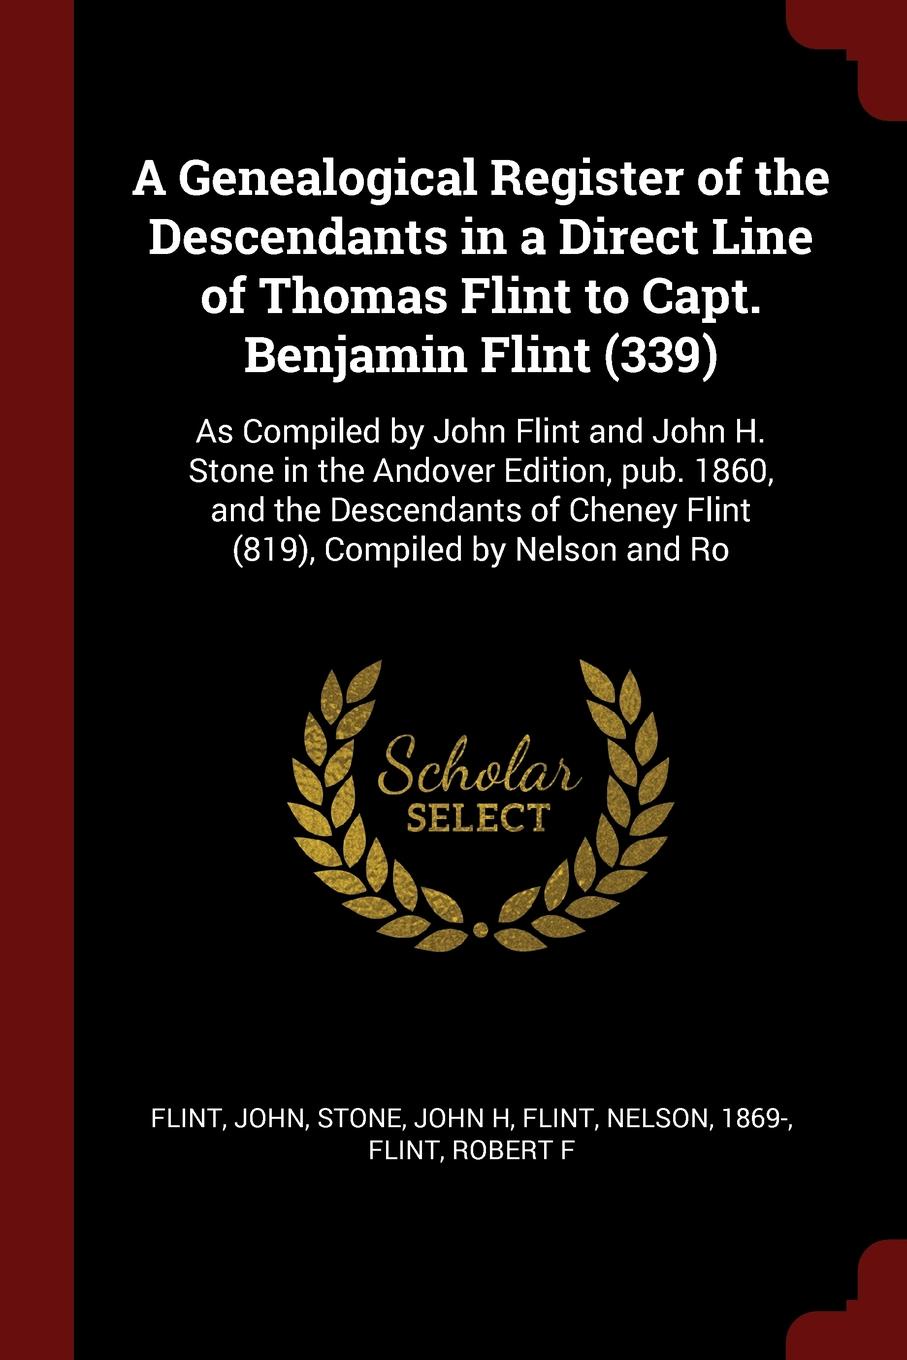 A Genealogical Register of the Descendants in a Direct Line of Thomas Flint to Capt. Benjamin Flint (339). As Compiled by John Flint and John H. Stone in the Andover Edition, pub. 1860, and the Descendants of Cheney Flint (819), Compiled by Nelson...